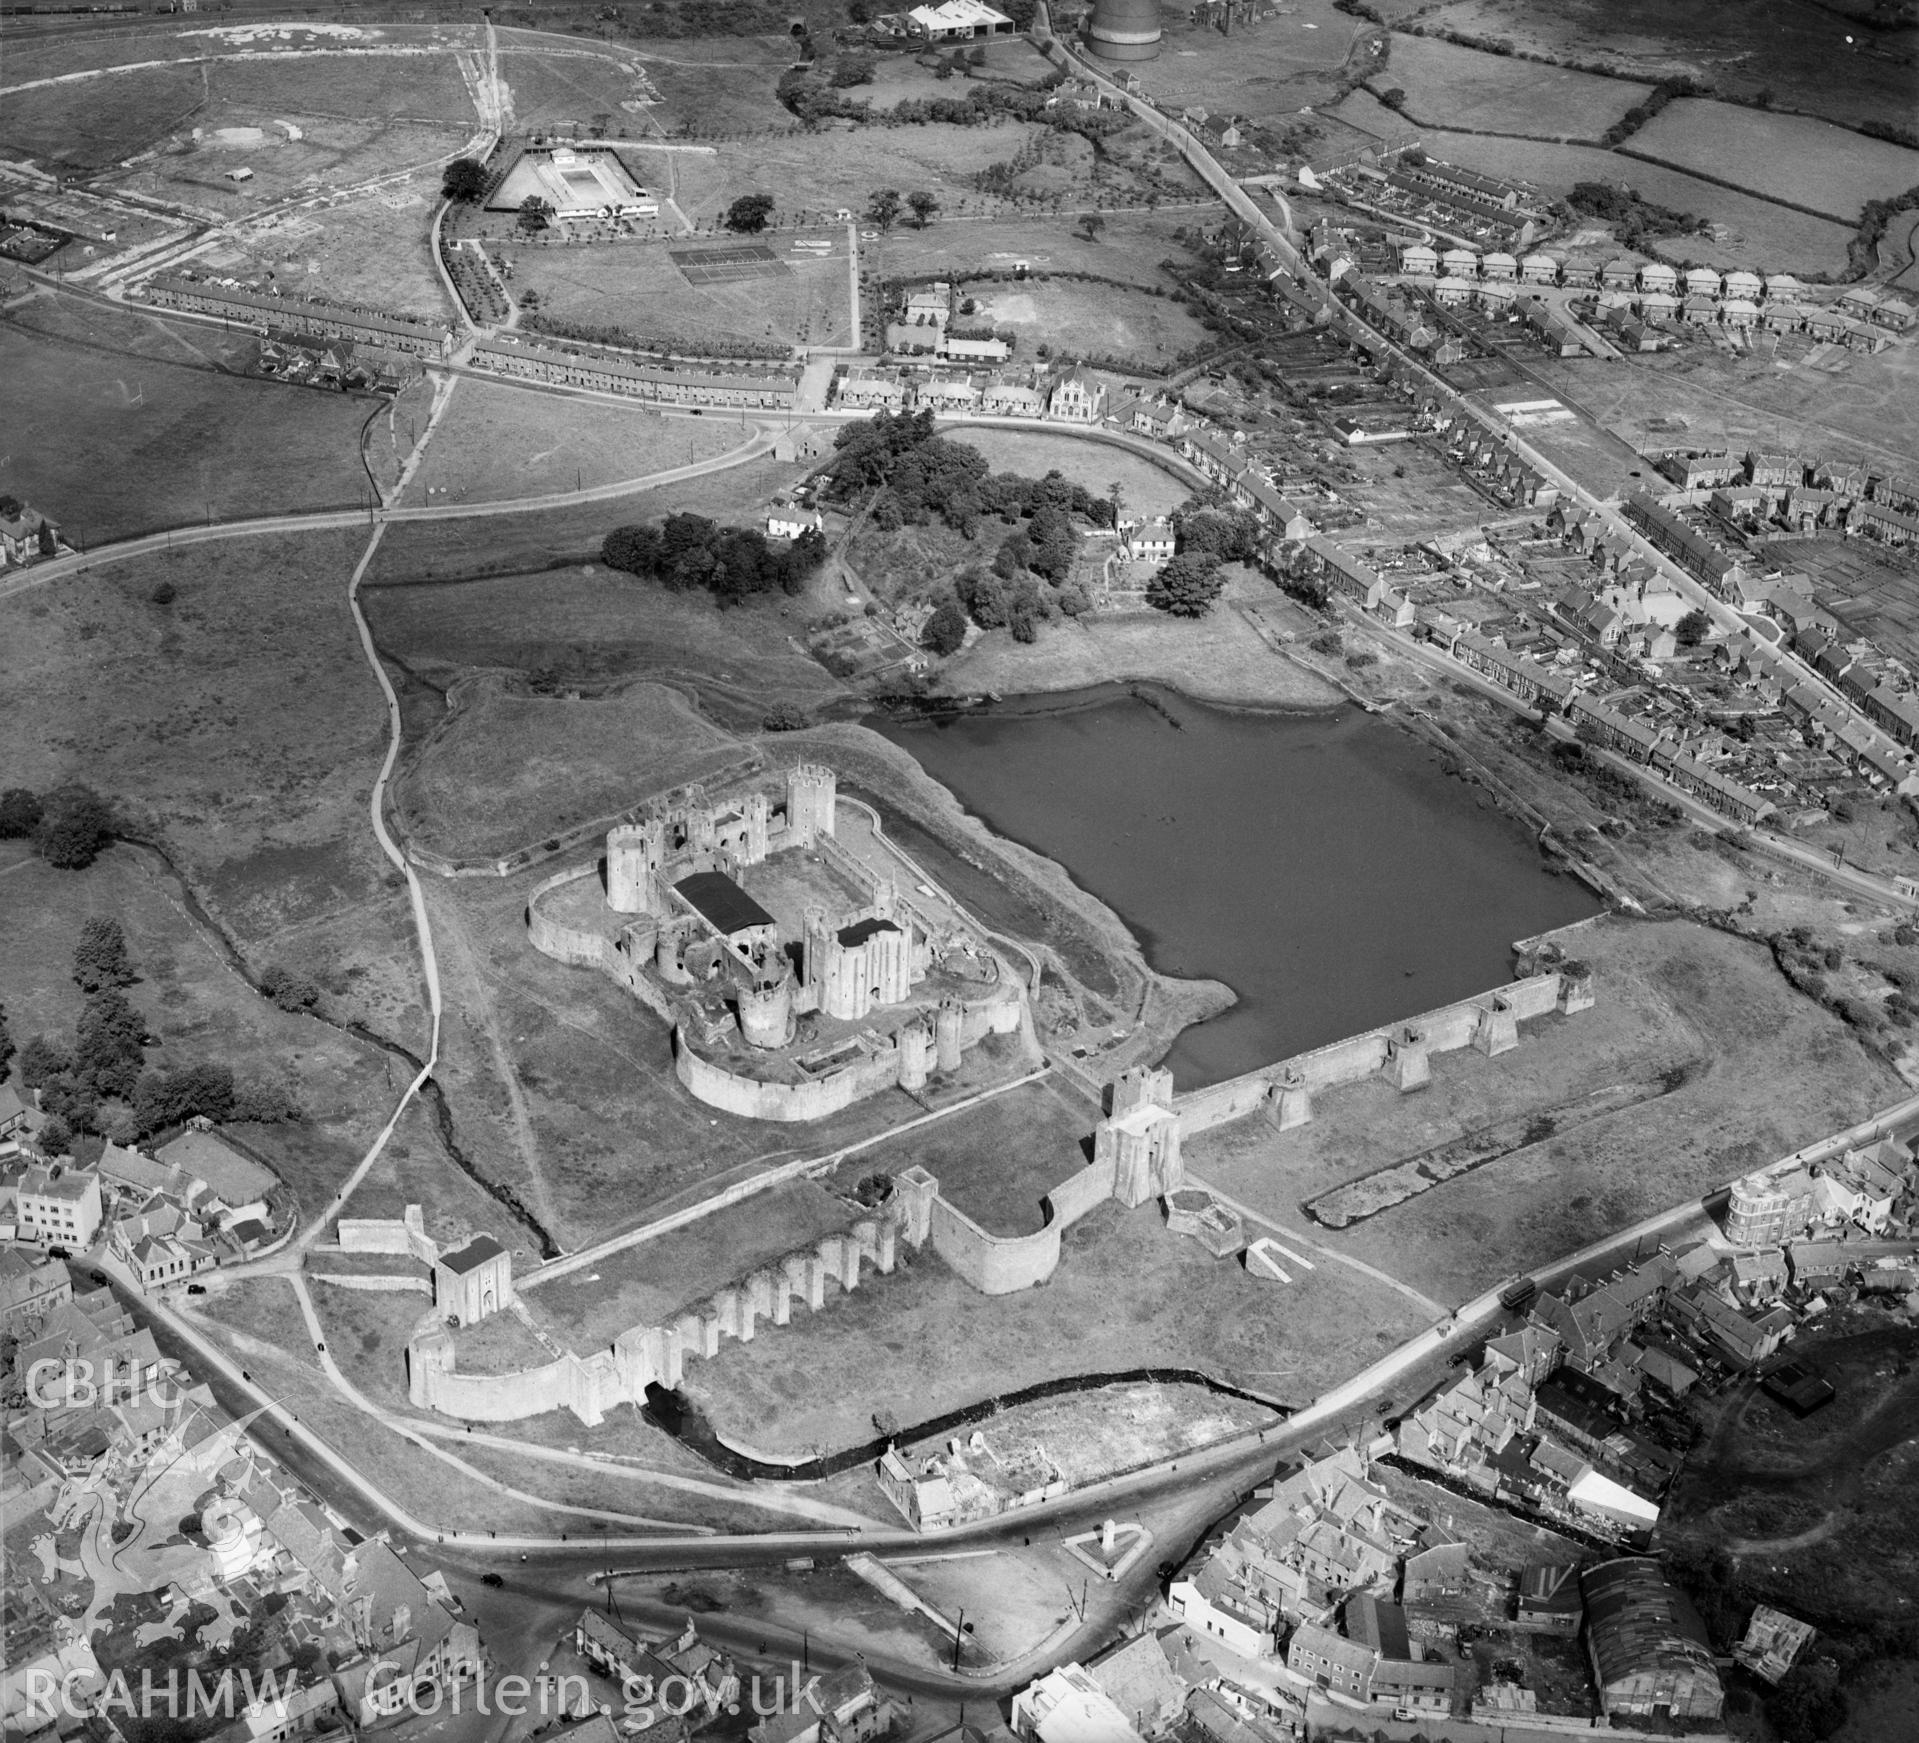 View of Caerphilly showing castle and open-air swimming pool, Oblique aerial photograph, 5?" cut roll film.